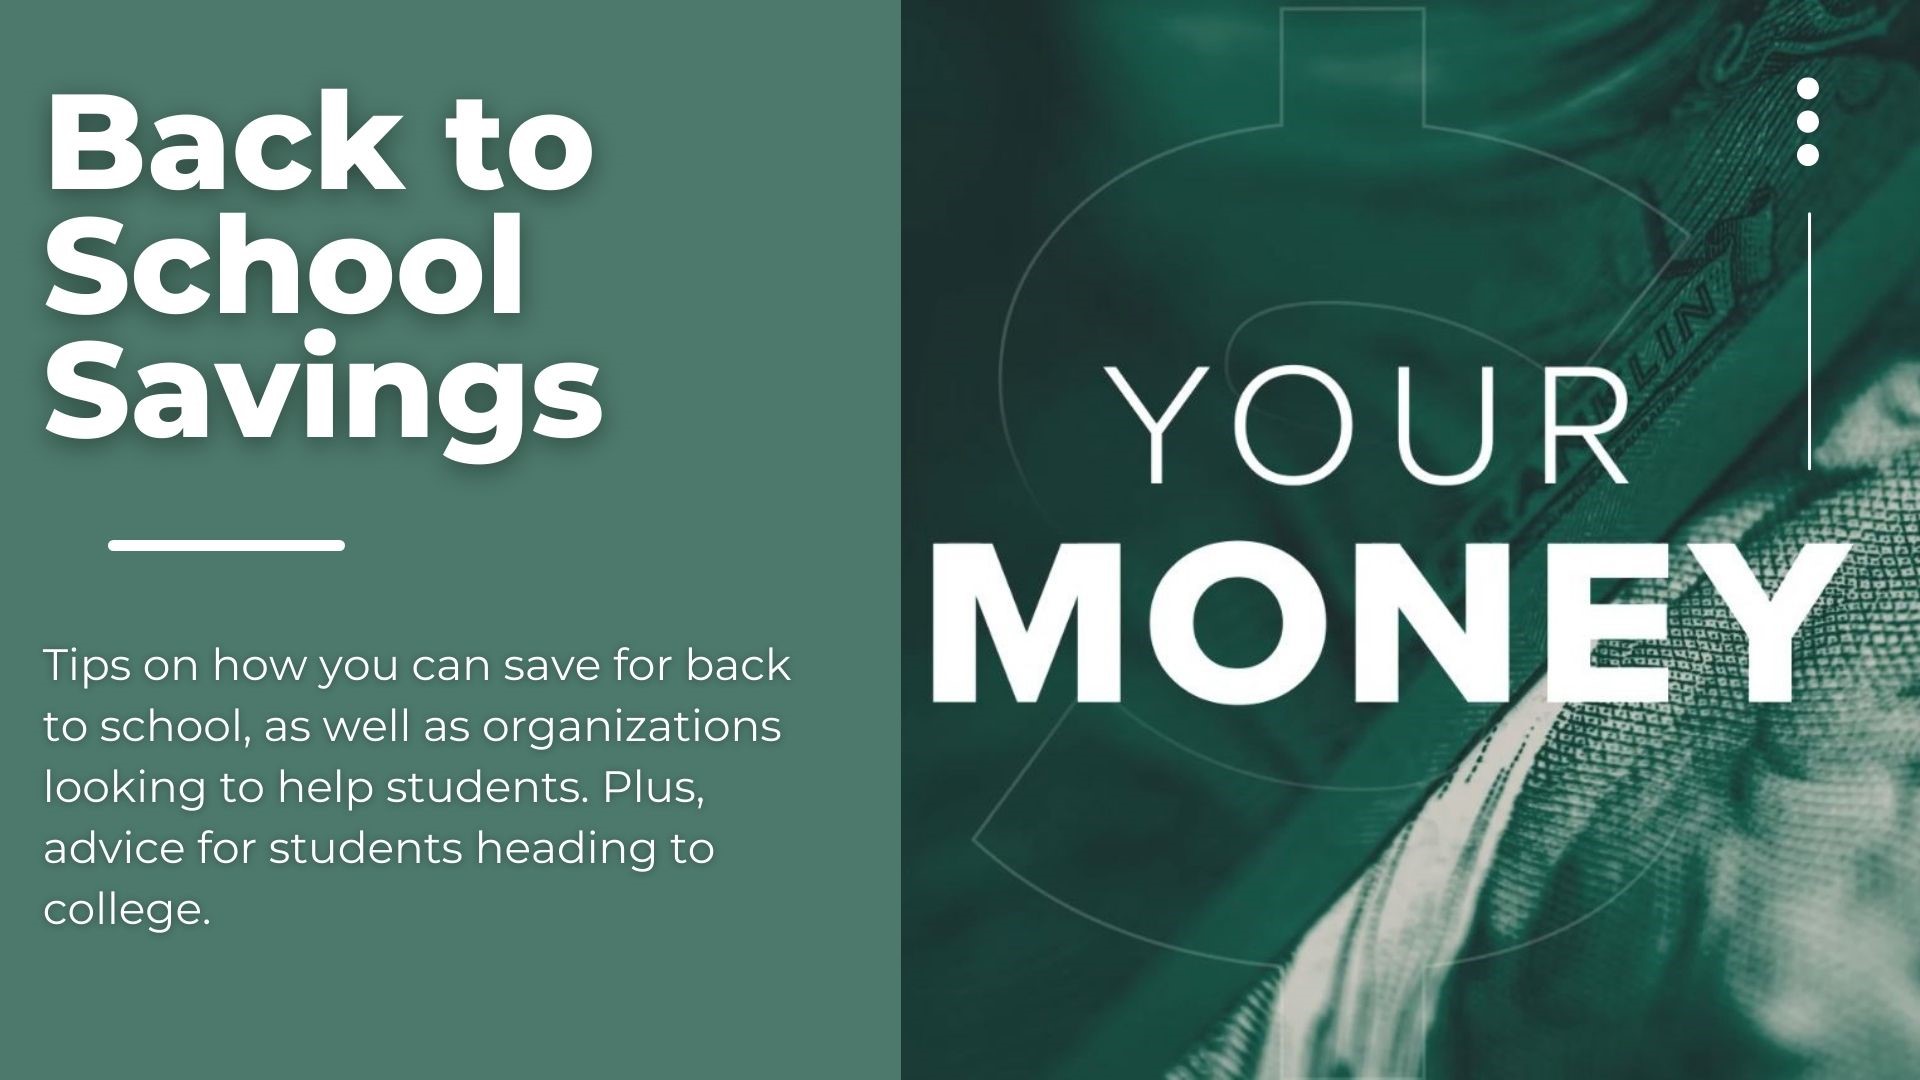 Tips on how you can save for back to school, as well as organizations looking to help students. Plus, advice for students heading to college.